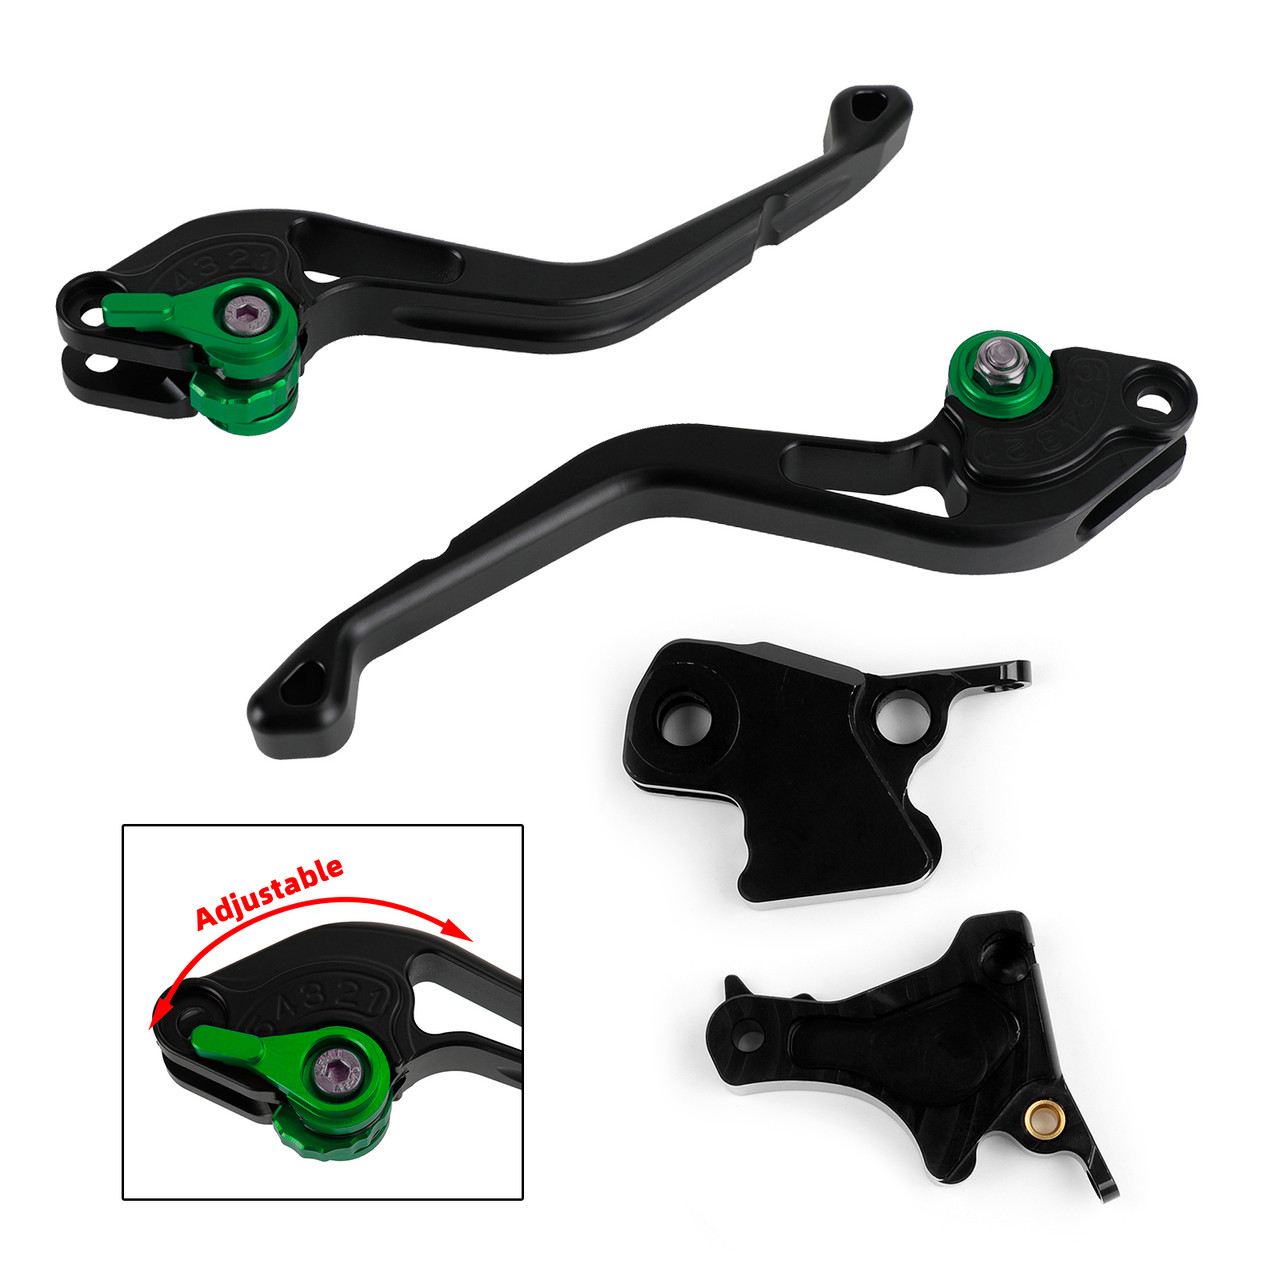 Short Clutch Brake Lever fit for BMW F650GS F700GS F800S F800ST F800GT